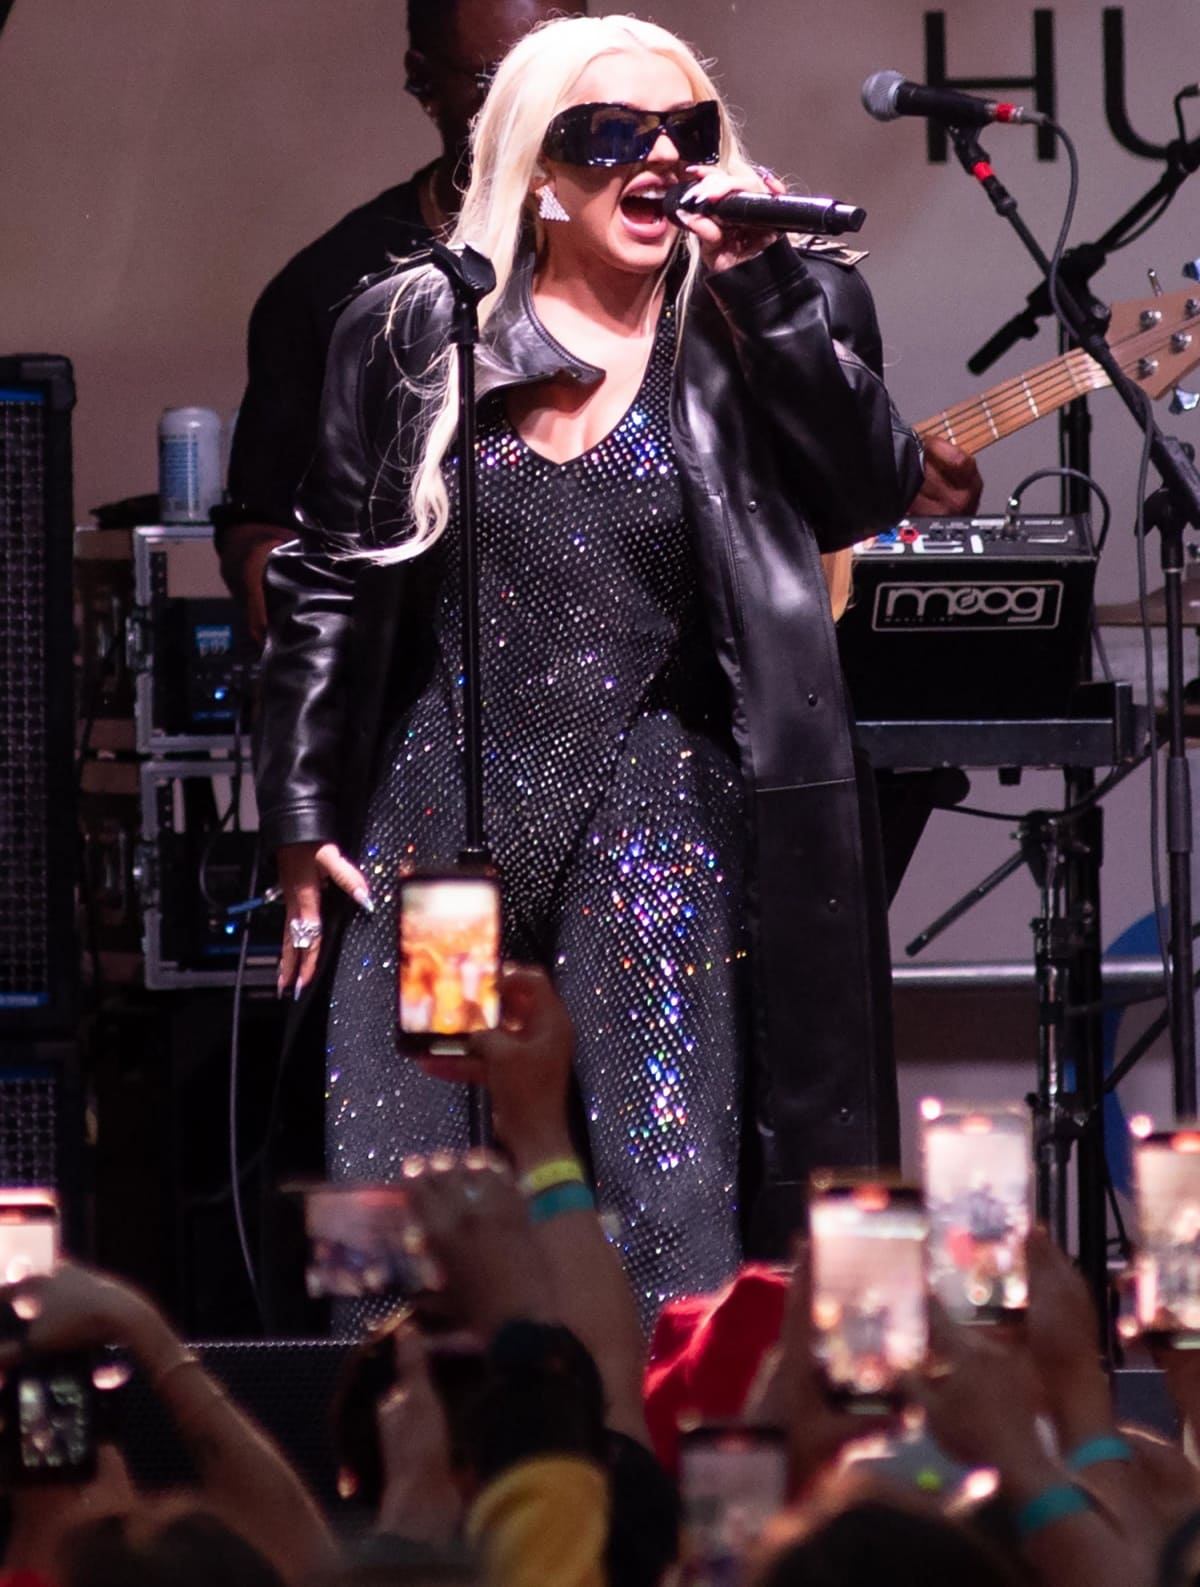 Christina Aguilera embraced a rock-star attitude with a black patent leather jacket and shield-like sunglasses as she performed for an enthusiastic crowd